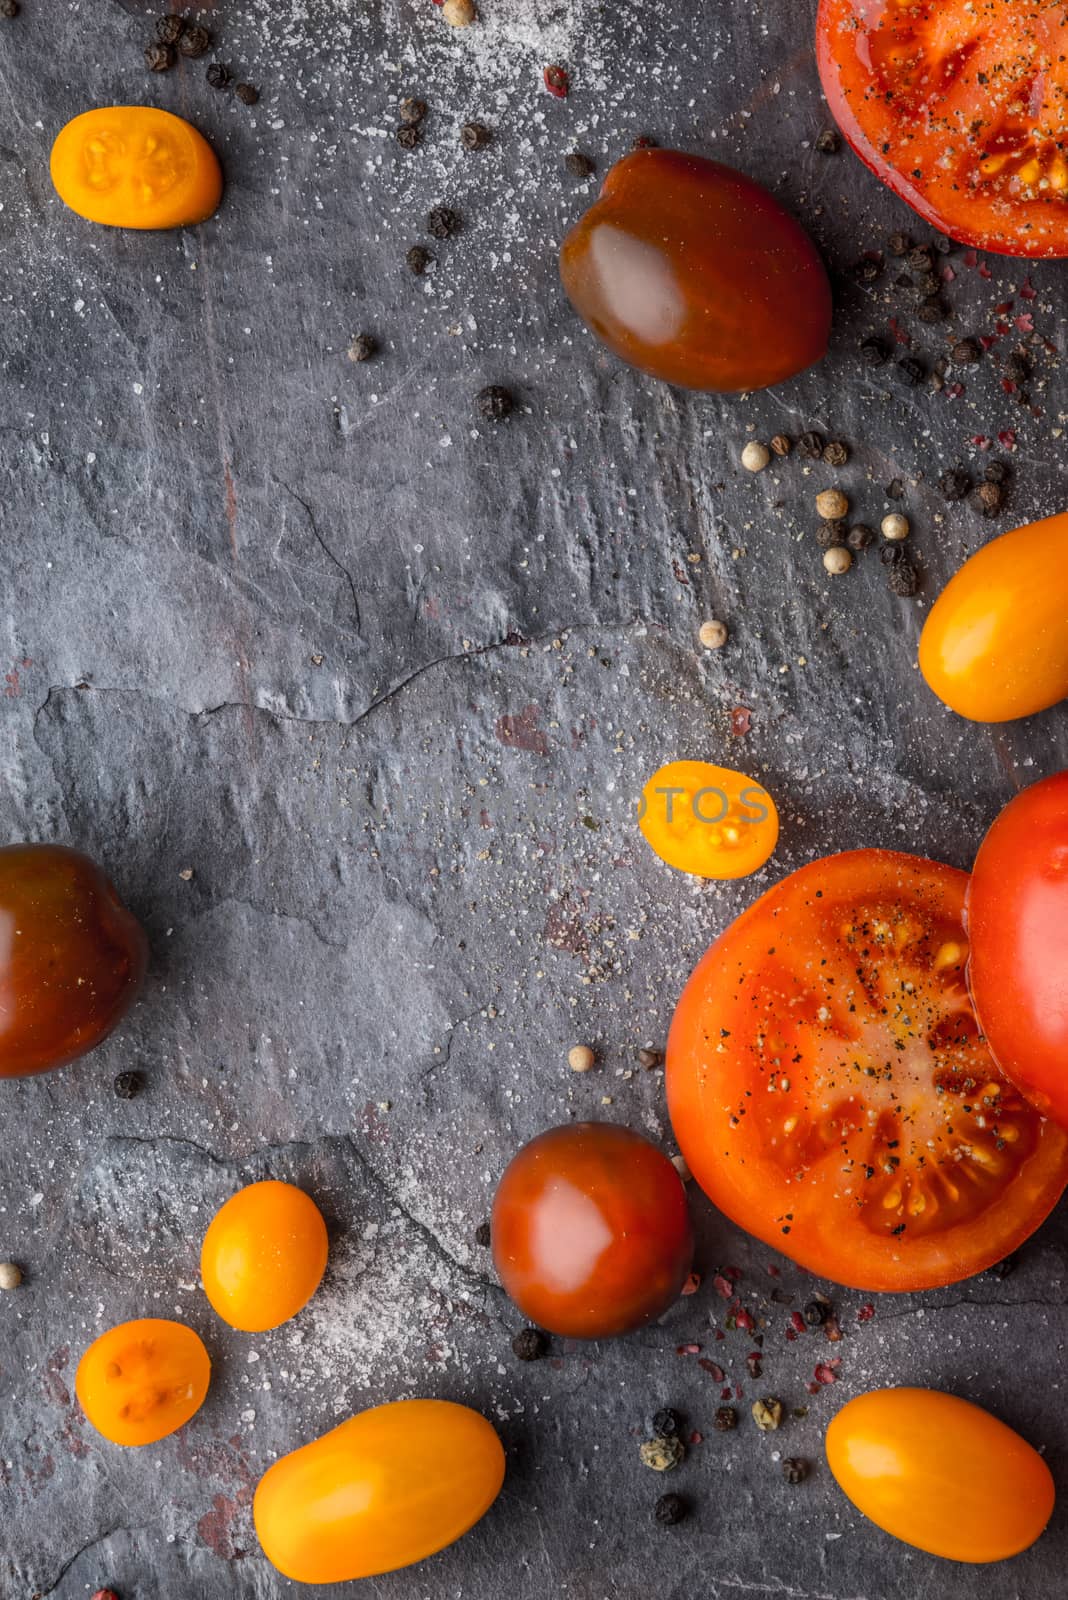 Tomatoes mix  with seasoning on the stone table by Deniskarpenkov